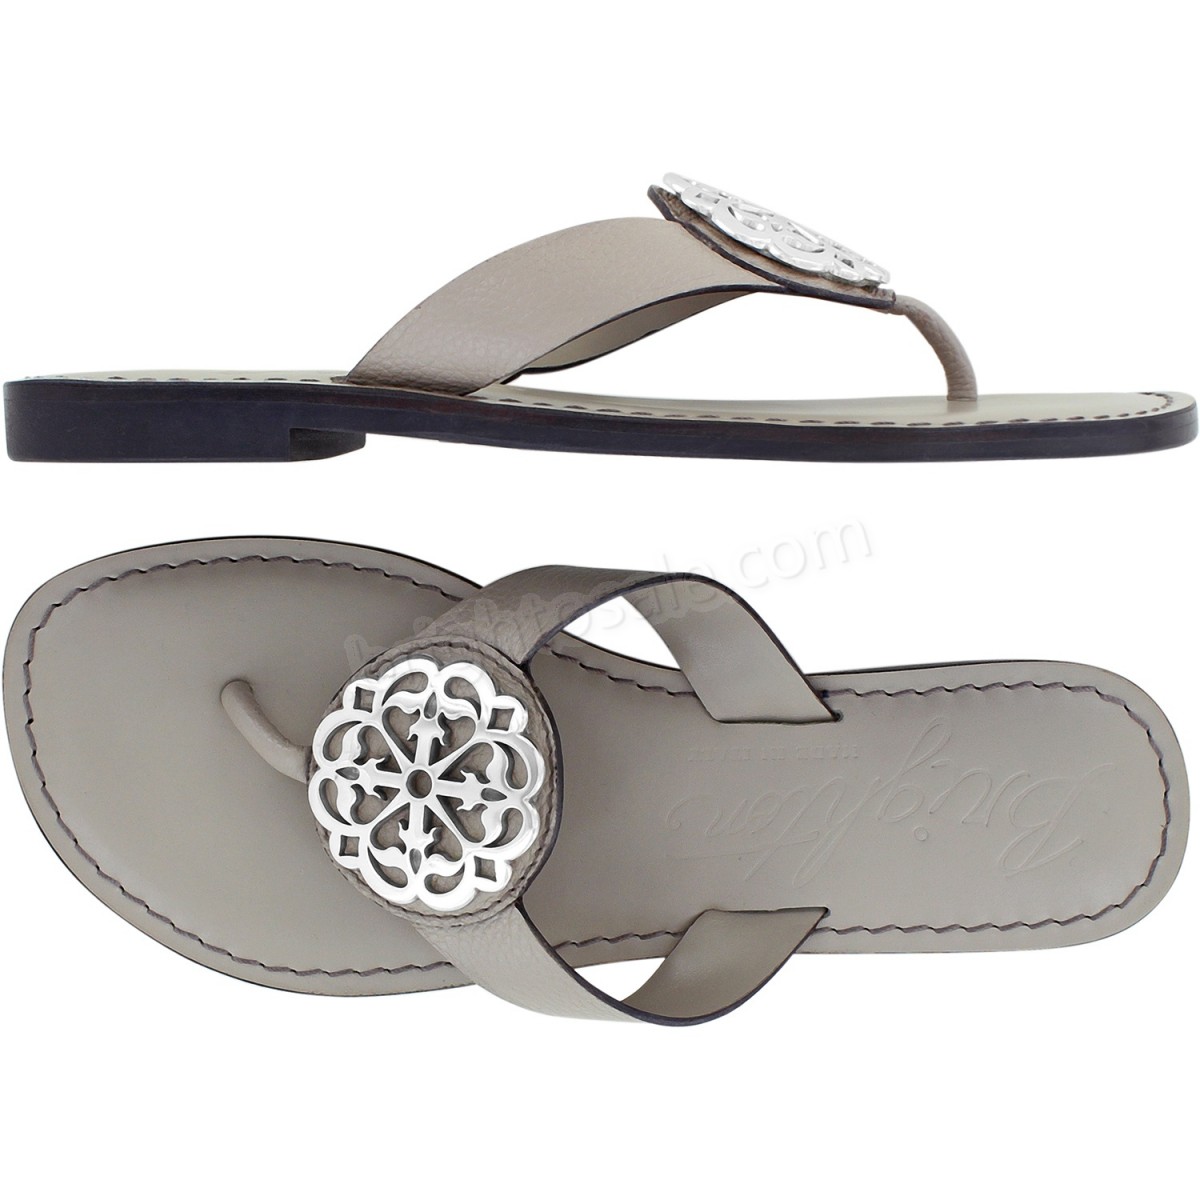 Brighton Collectibles & Online Discount Twine Woven Sandals - -1